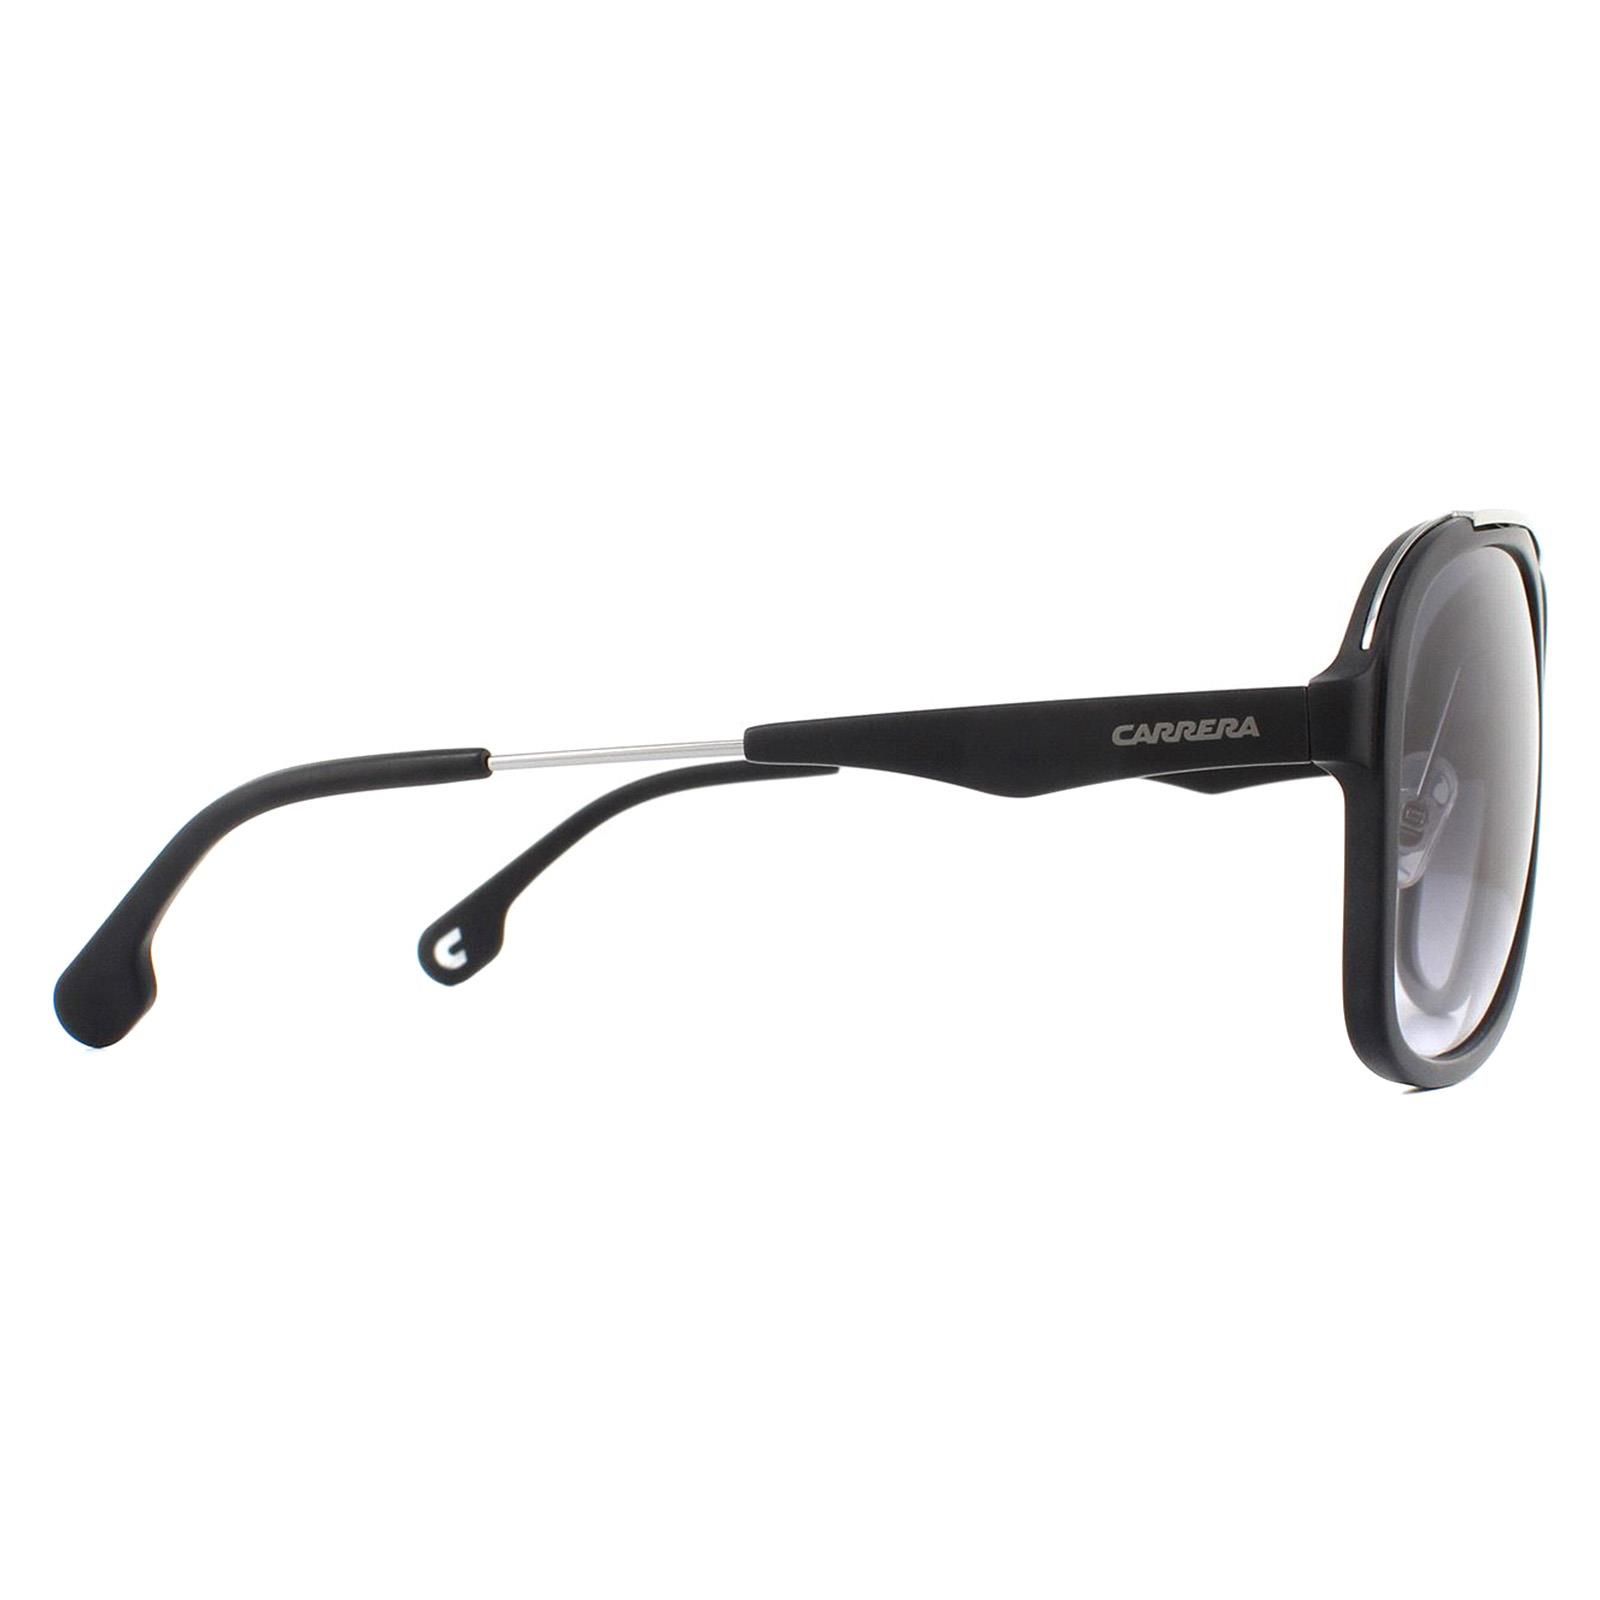 Carrera Sunglasses 133/S TI7 9O Ruthenium Matte Black Dark Grey Gradient have the latest trend for a top bar across the top of the frame for a trendy double bridge look in shiny metal matching the bridge and temple section also. Very fashionable and very popular!